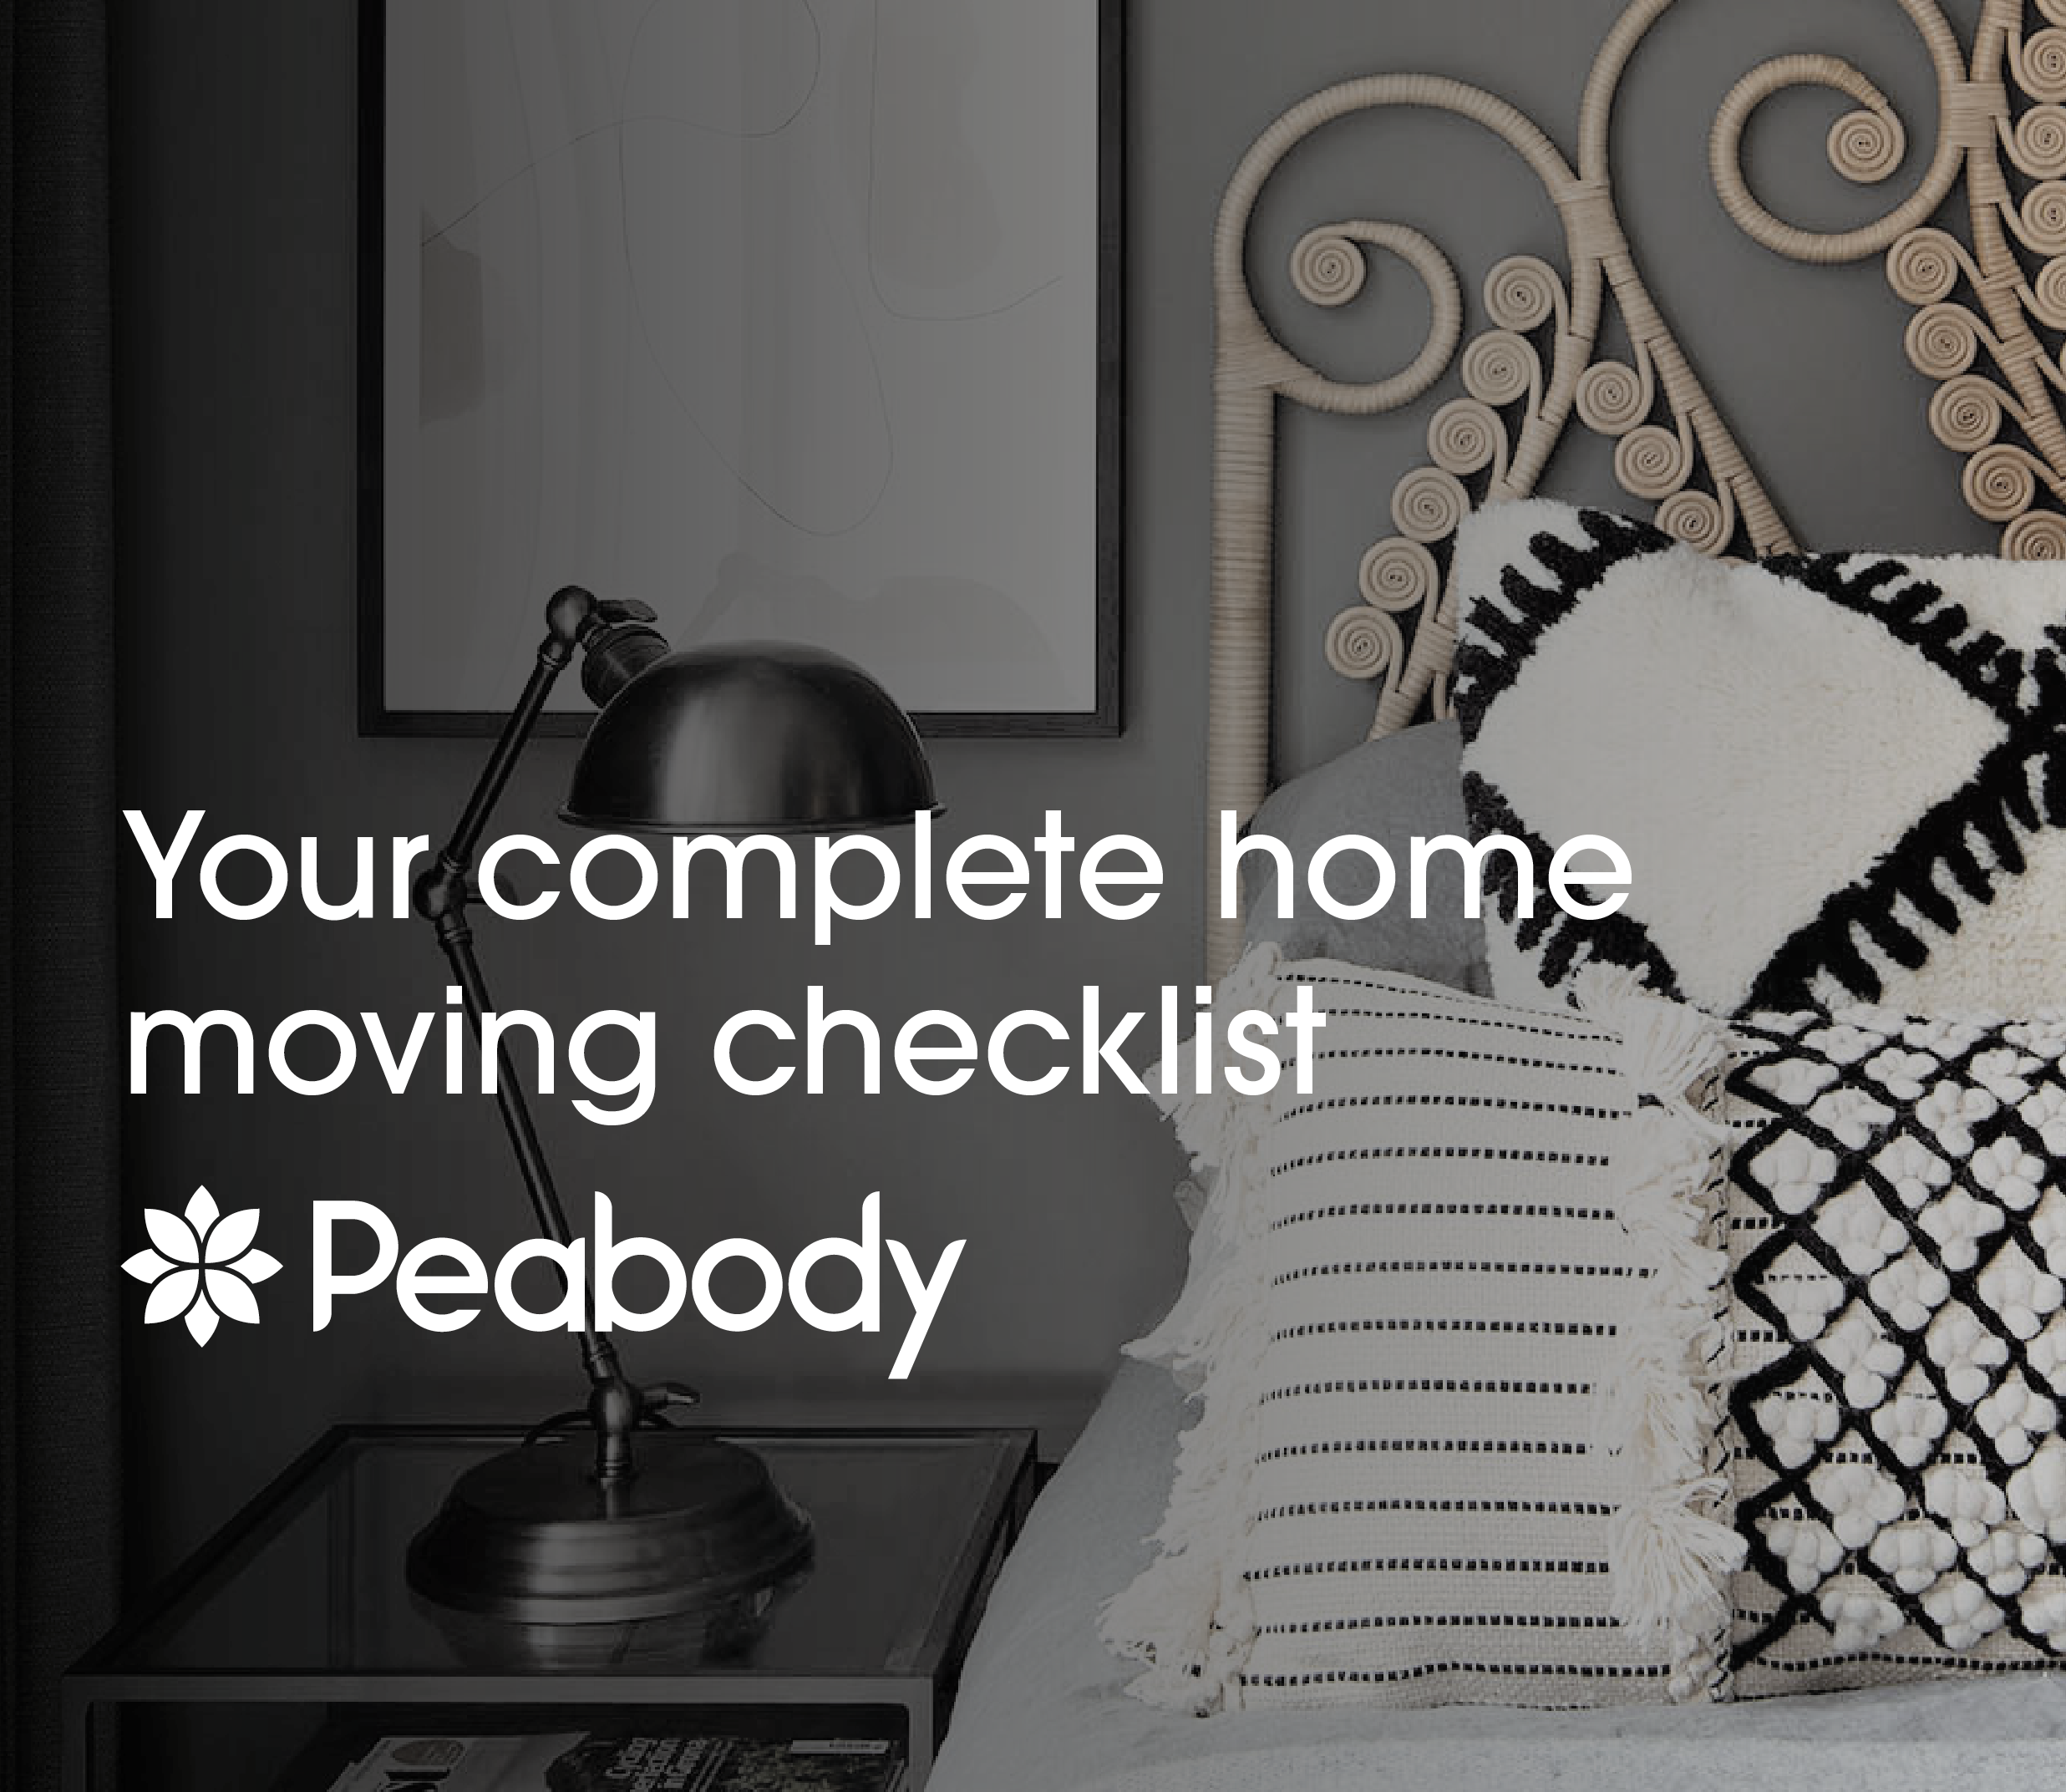 Peabody's complete home moving checklist